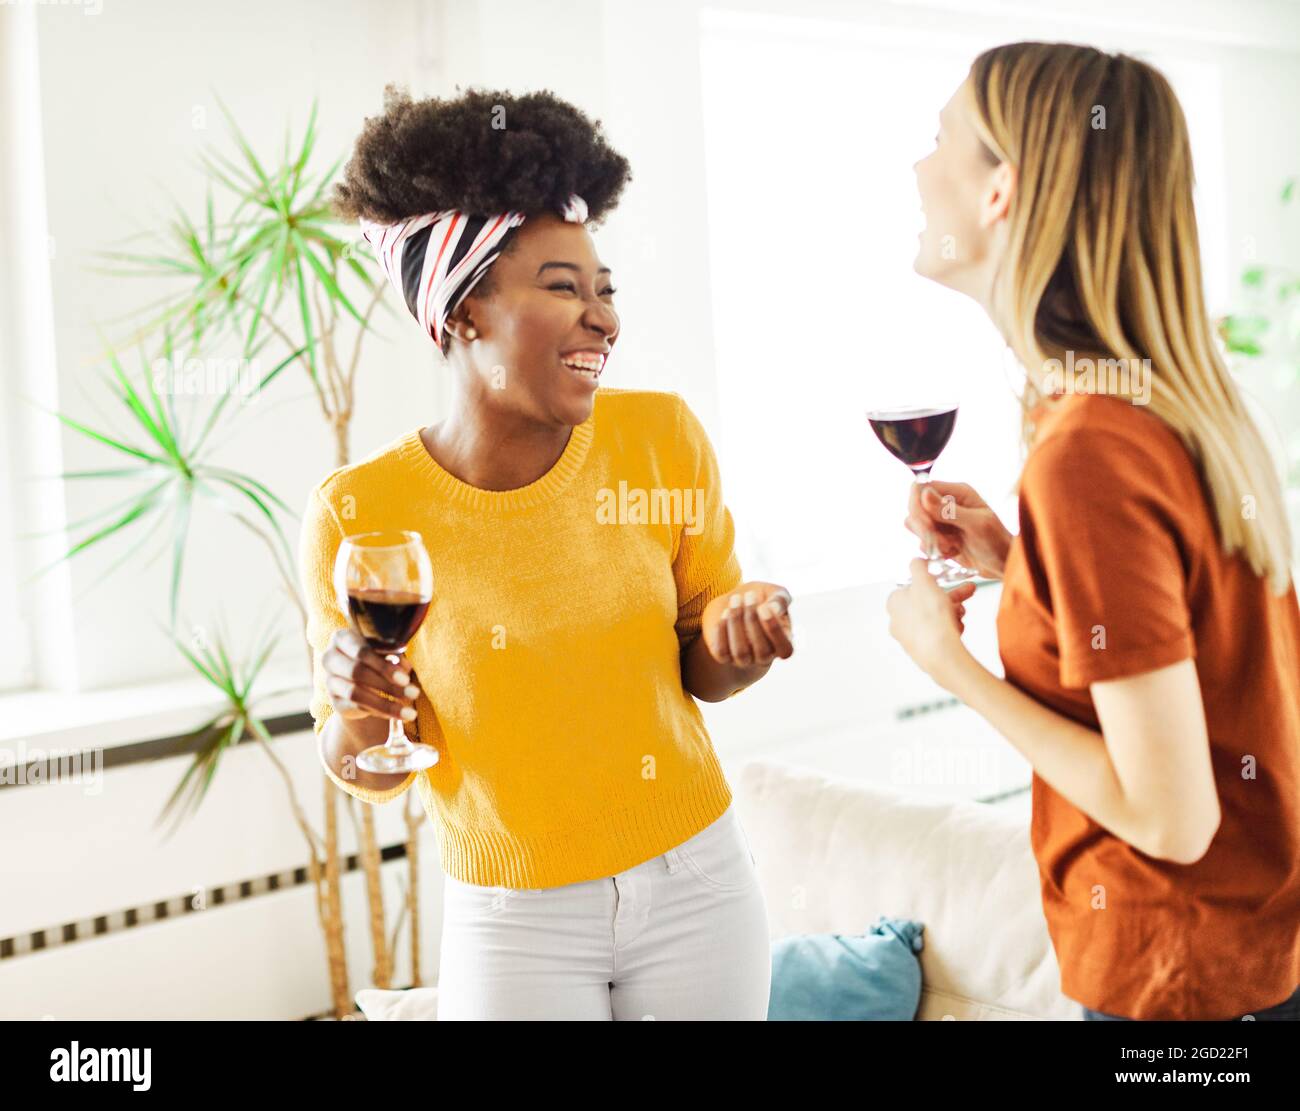 girl party dancing drinking wine happy fun friend care free carefree glass drink beautiful youth woman Stock Photo